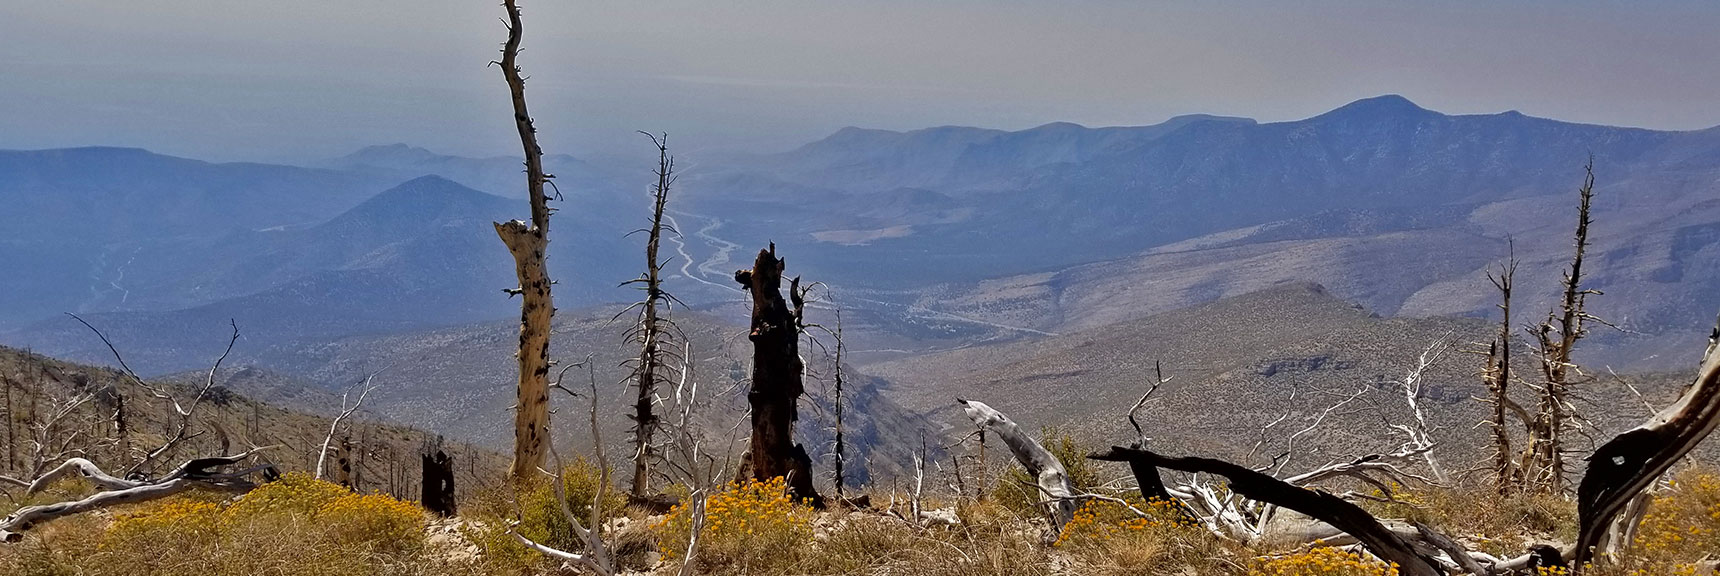 Lovell Canyon Shrouded in Haze of California Fires is Backdrop to 2013 Sexton Ridge Burn Area | Griffith Peak Southern Approach from Sexton Ridge Above Lovell Canyon, Nevada